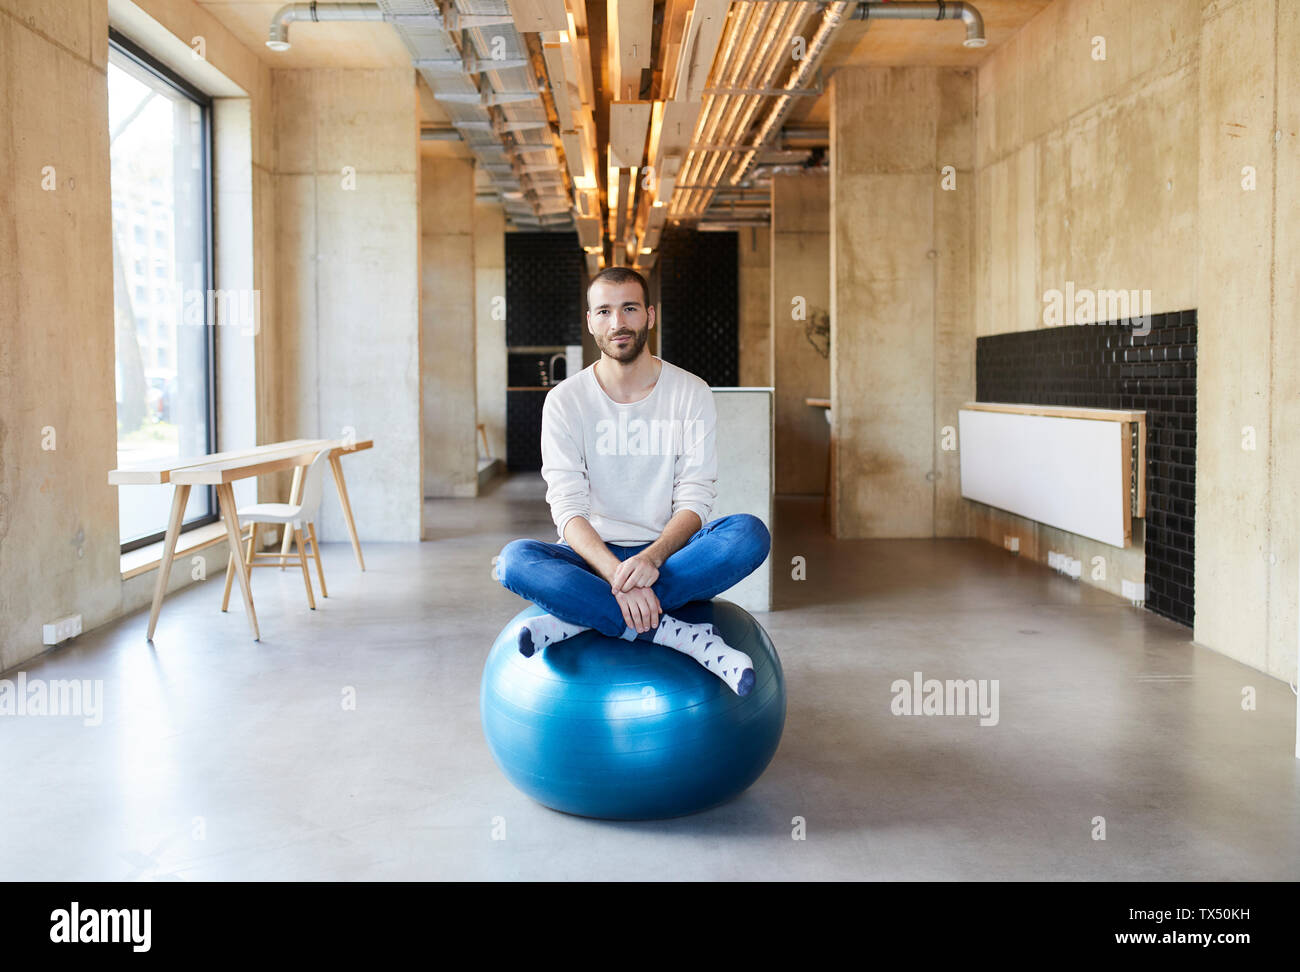 Portrait of young man sitting on fitness ball in modern office Stock Photo